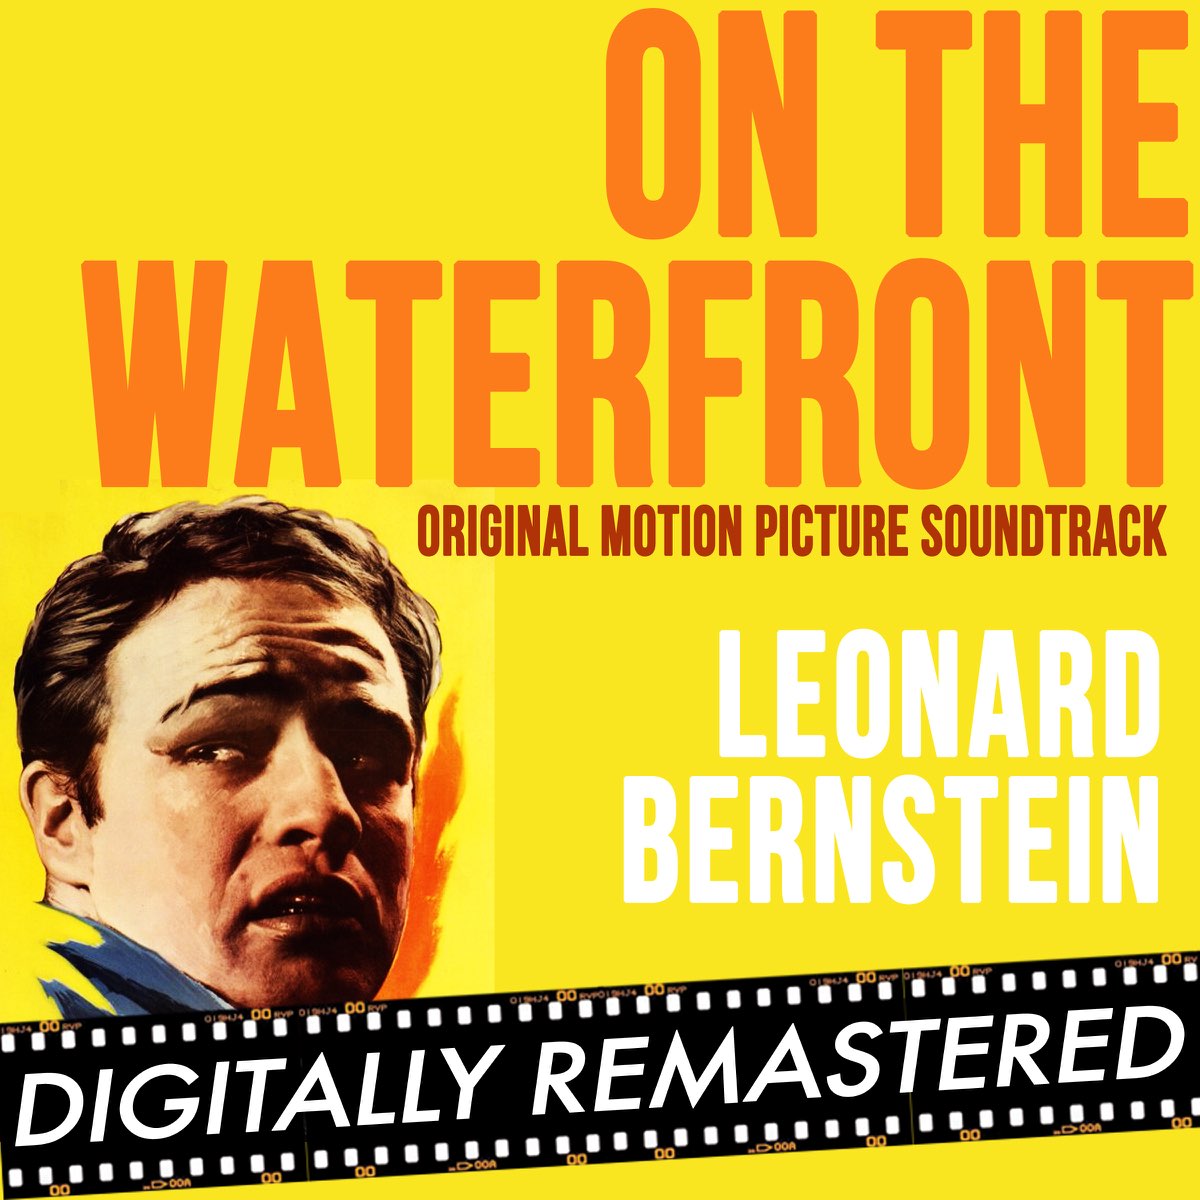 ‎on The Waterfront Original Motion Picture Soundtrack Digitally